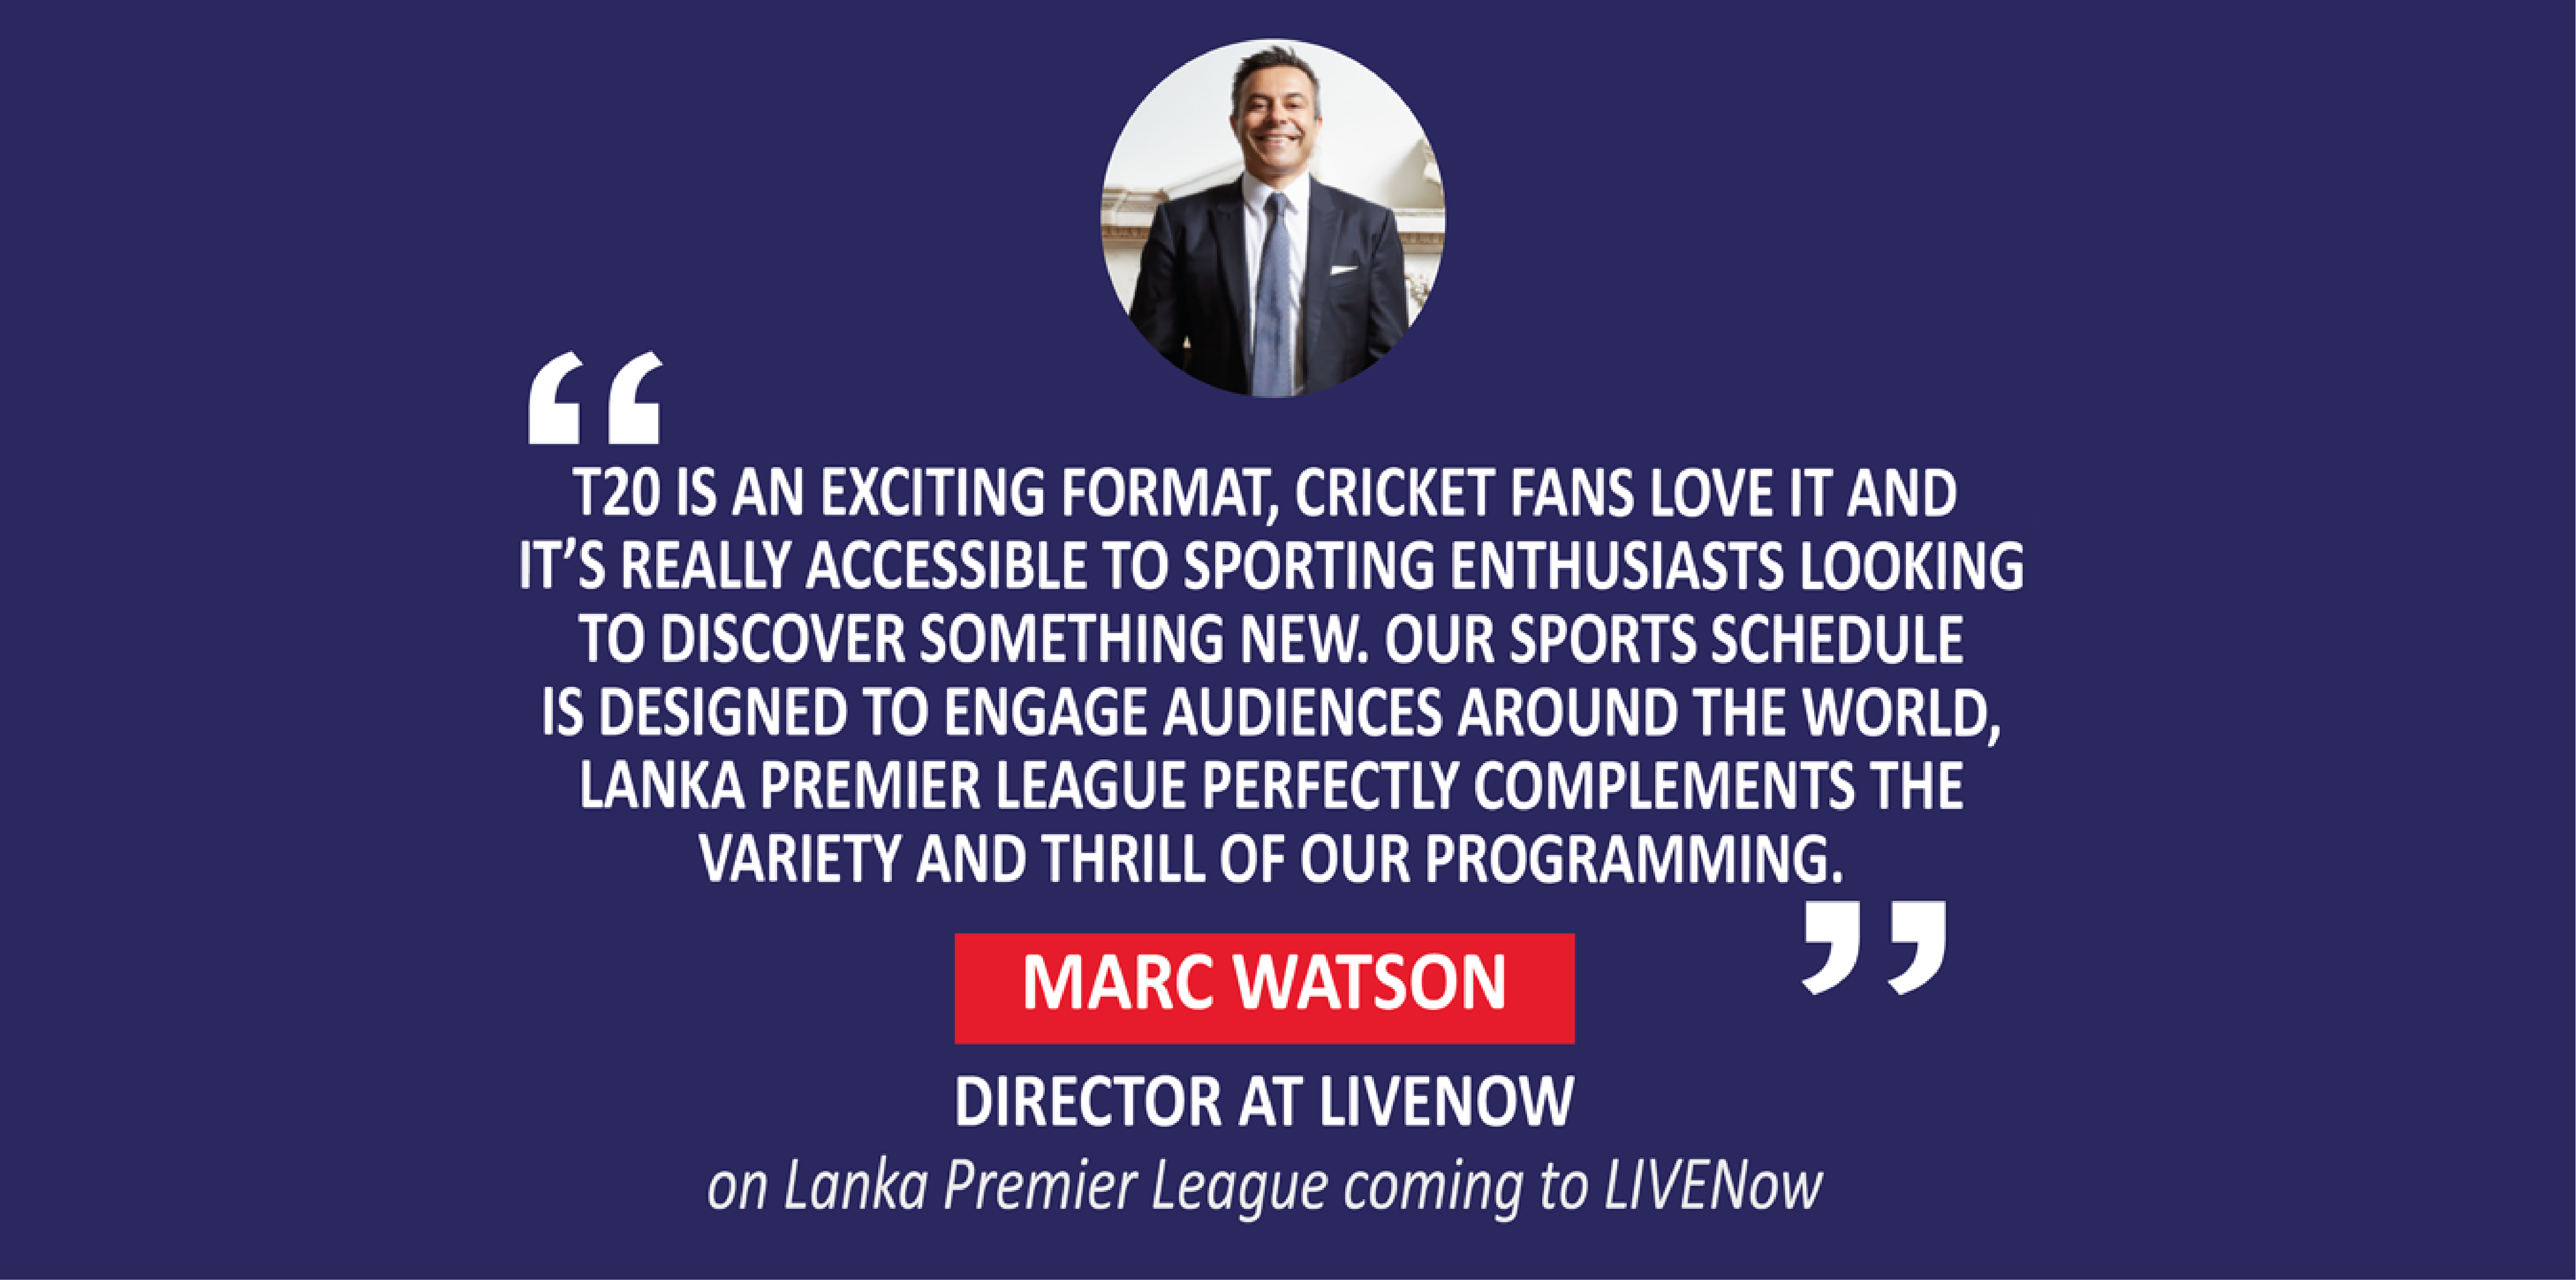 Marc Watson, Director at LIVENow on Lanka Premier League coming to LIVENow